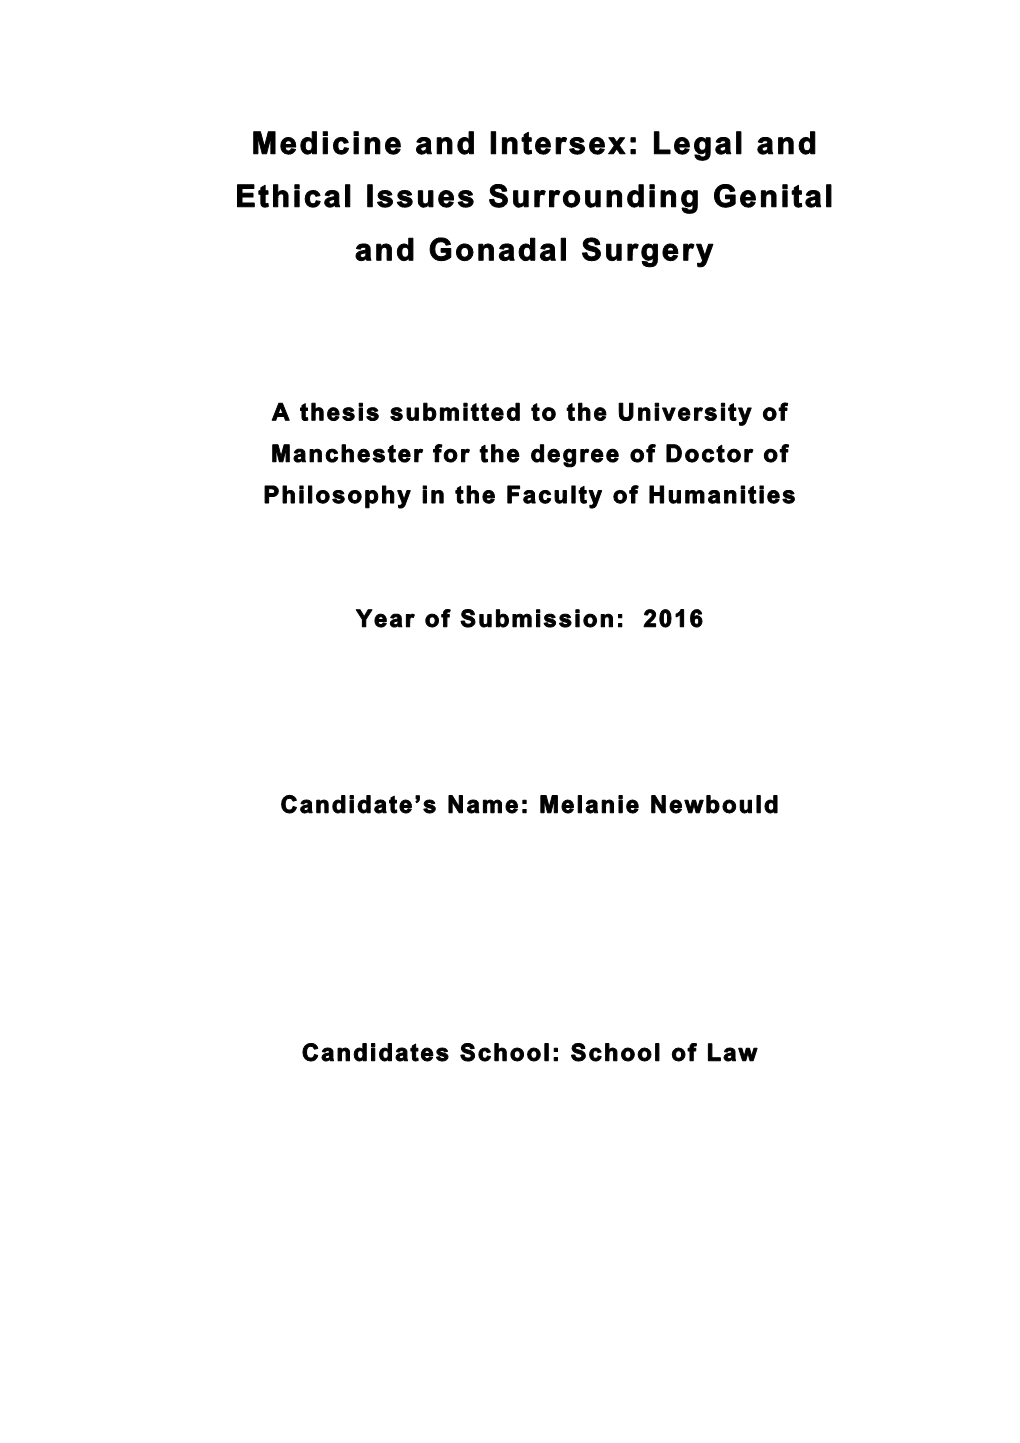 Legal and Ethical Issues Surrounding Genital and Gonadal Surgery